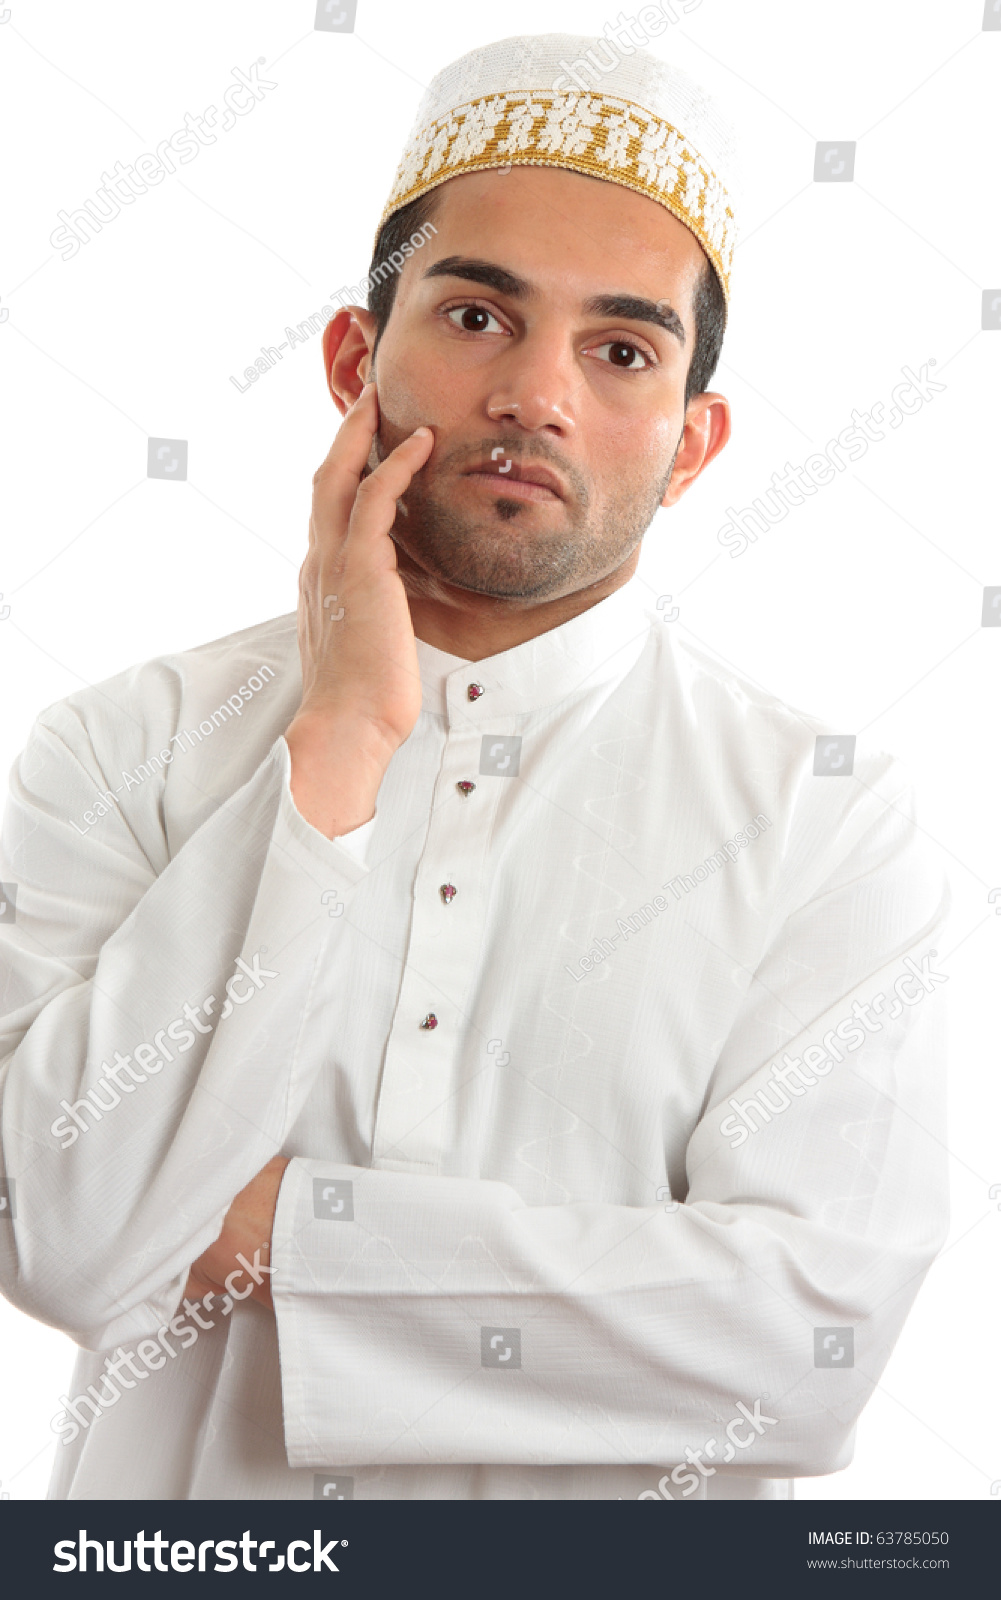 A man wearing cultural ethnic robe and decorative topi thinking.  White background. #63785050